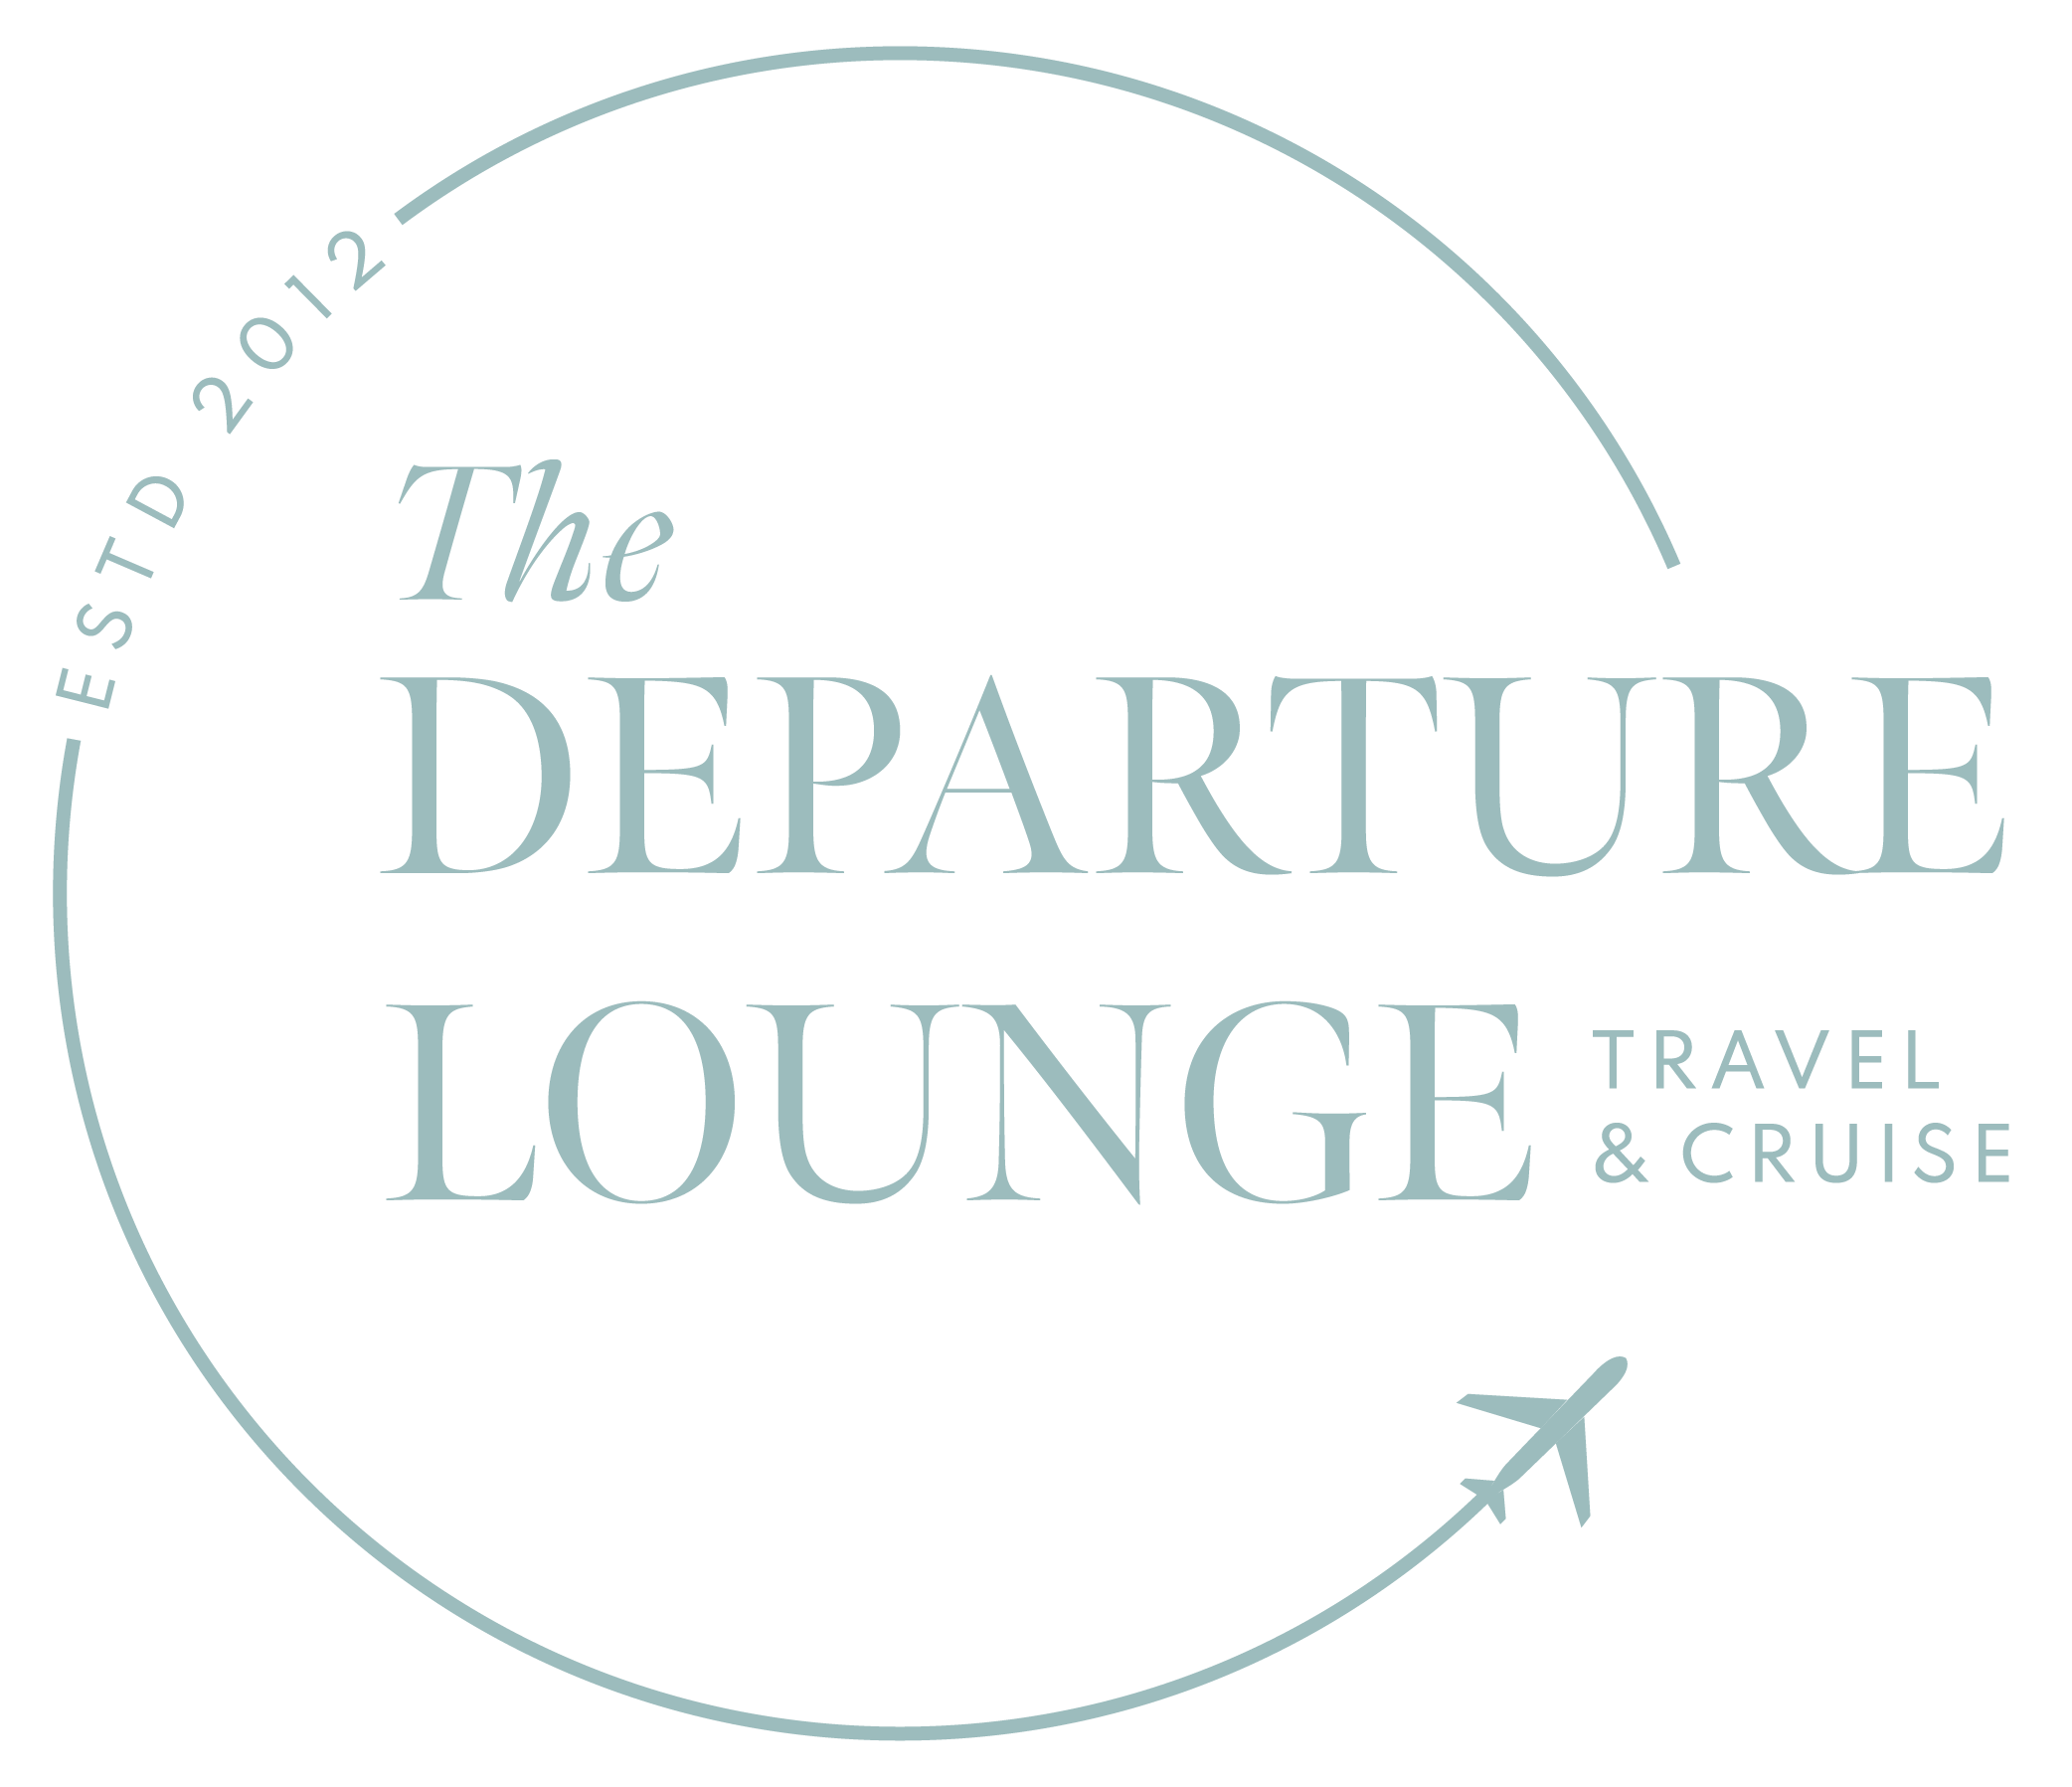 The Departure Lounge Travel & Cruise